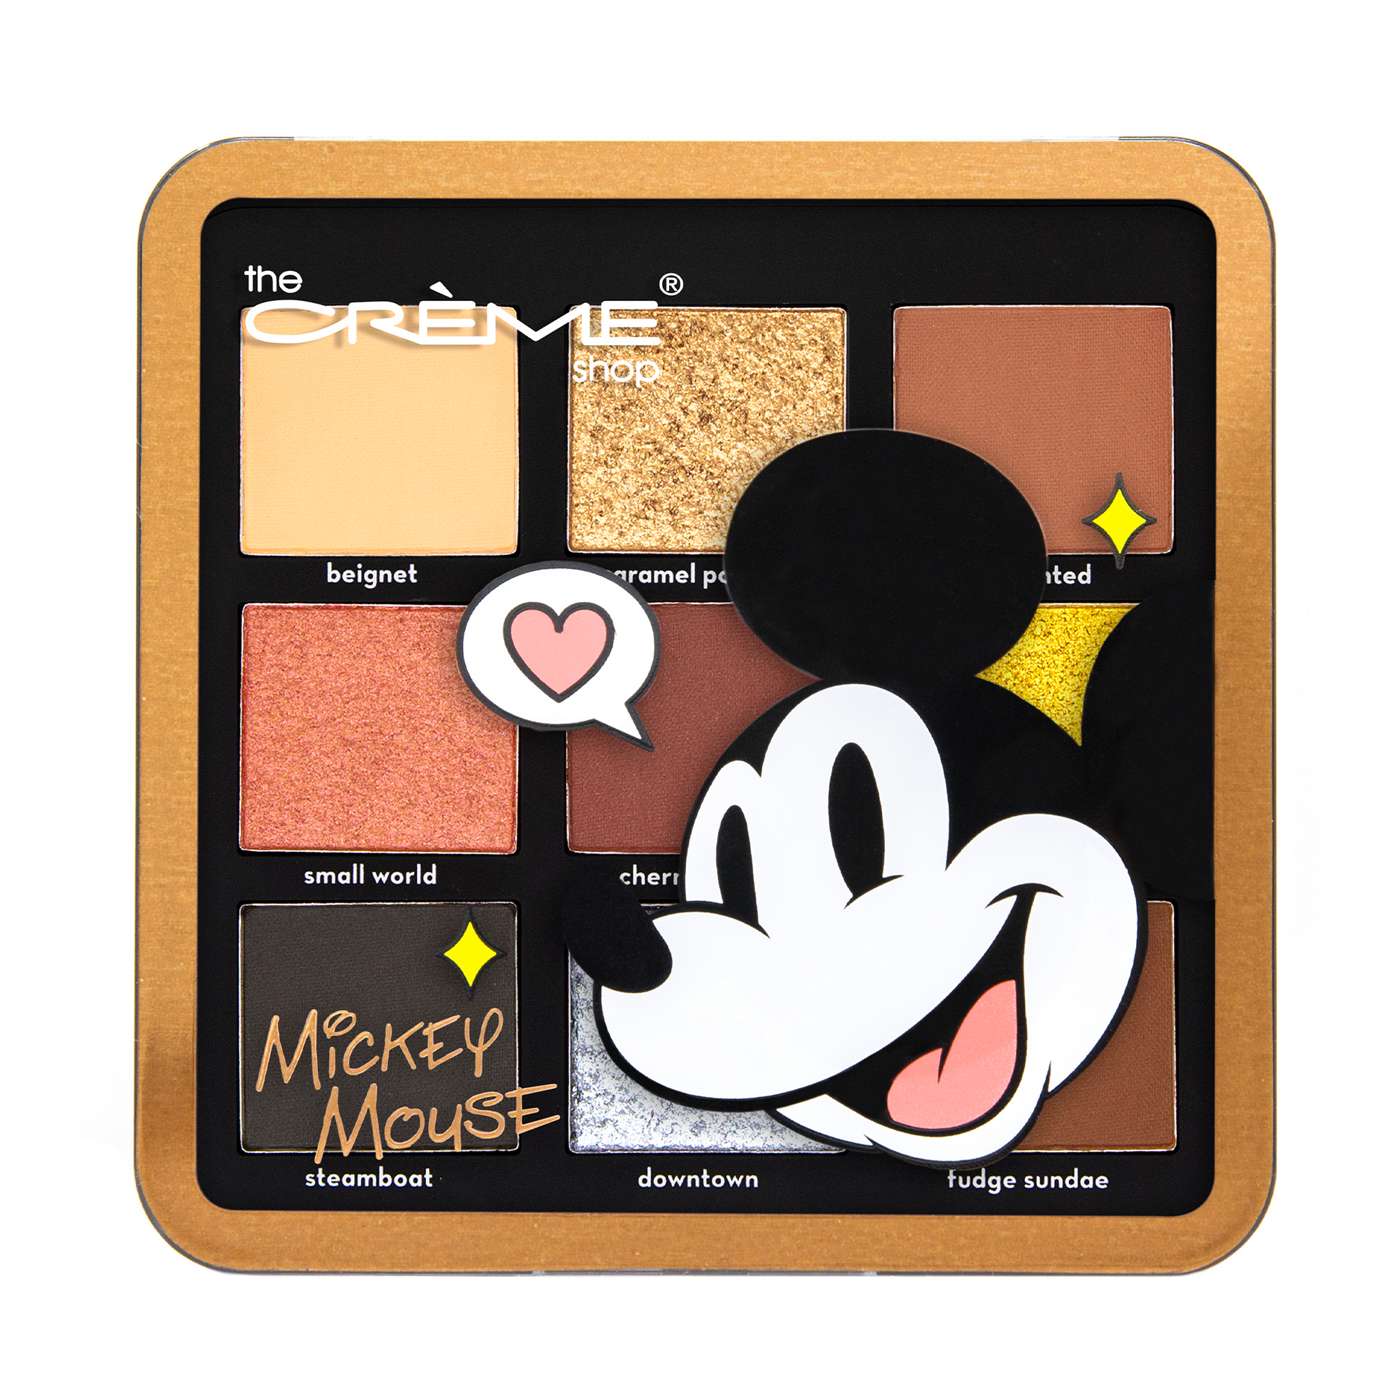 The Crème Shop Eyeshadow Palette - Around the World; image 4 of 4